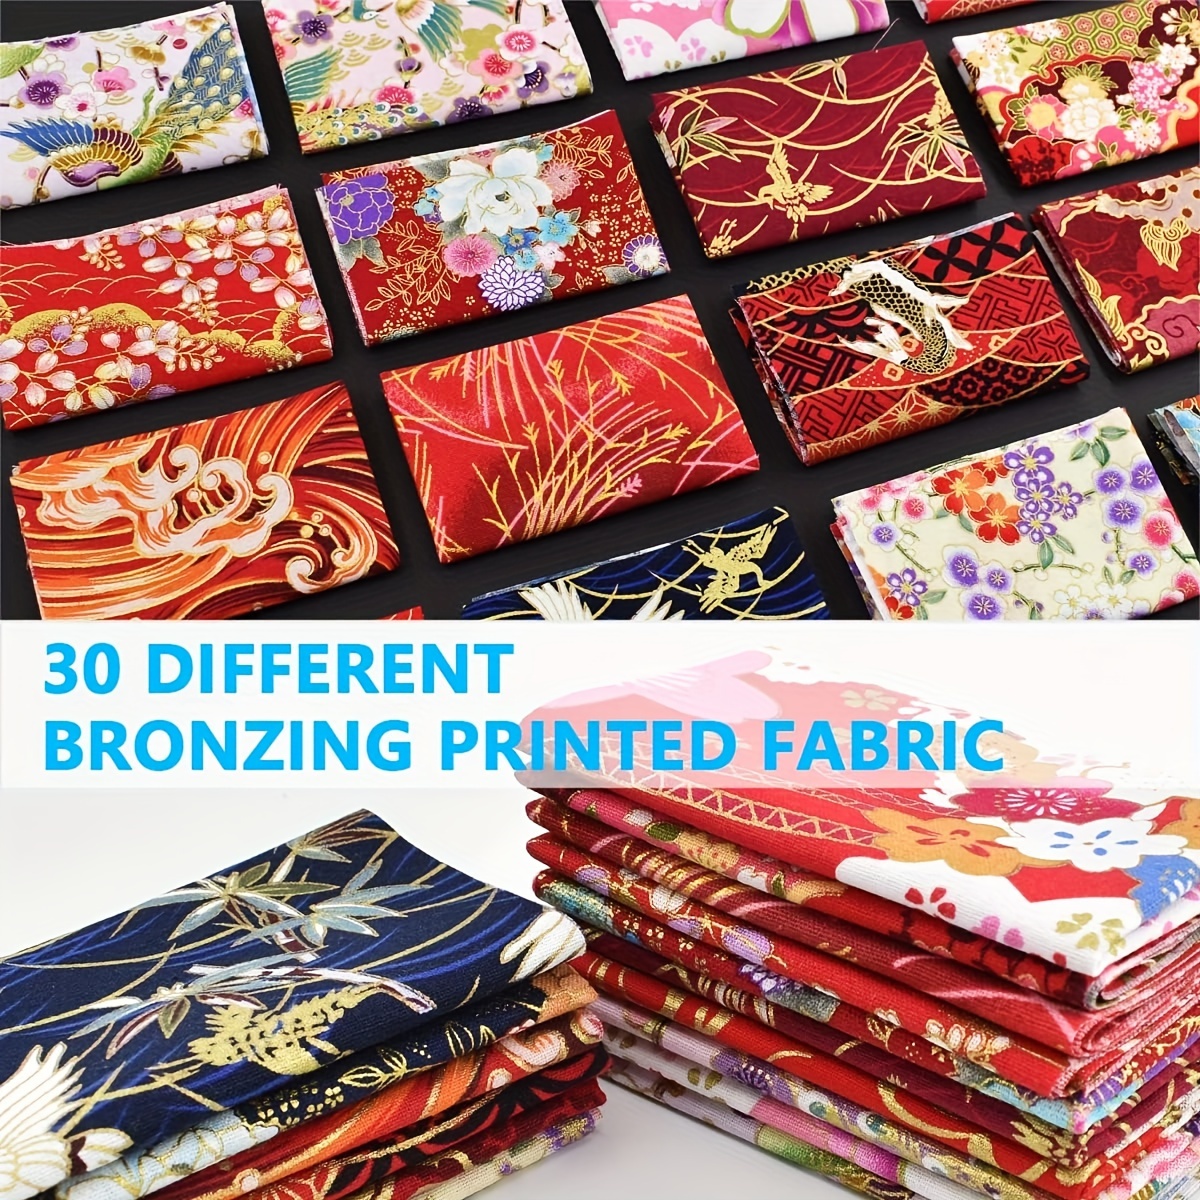 

30pcs Bronzing Traditional Japanese Style Cotton Fabric, Precut Printed Fabric, Sewing Supplies For Patchwork Sewing, Diy Bow And Diy Clothing Crafts Quilters Gifts